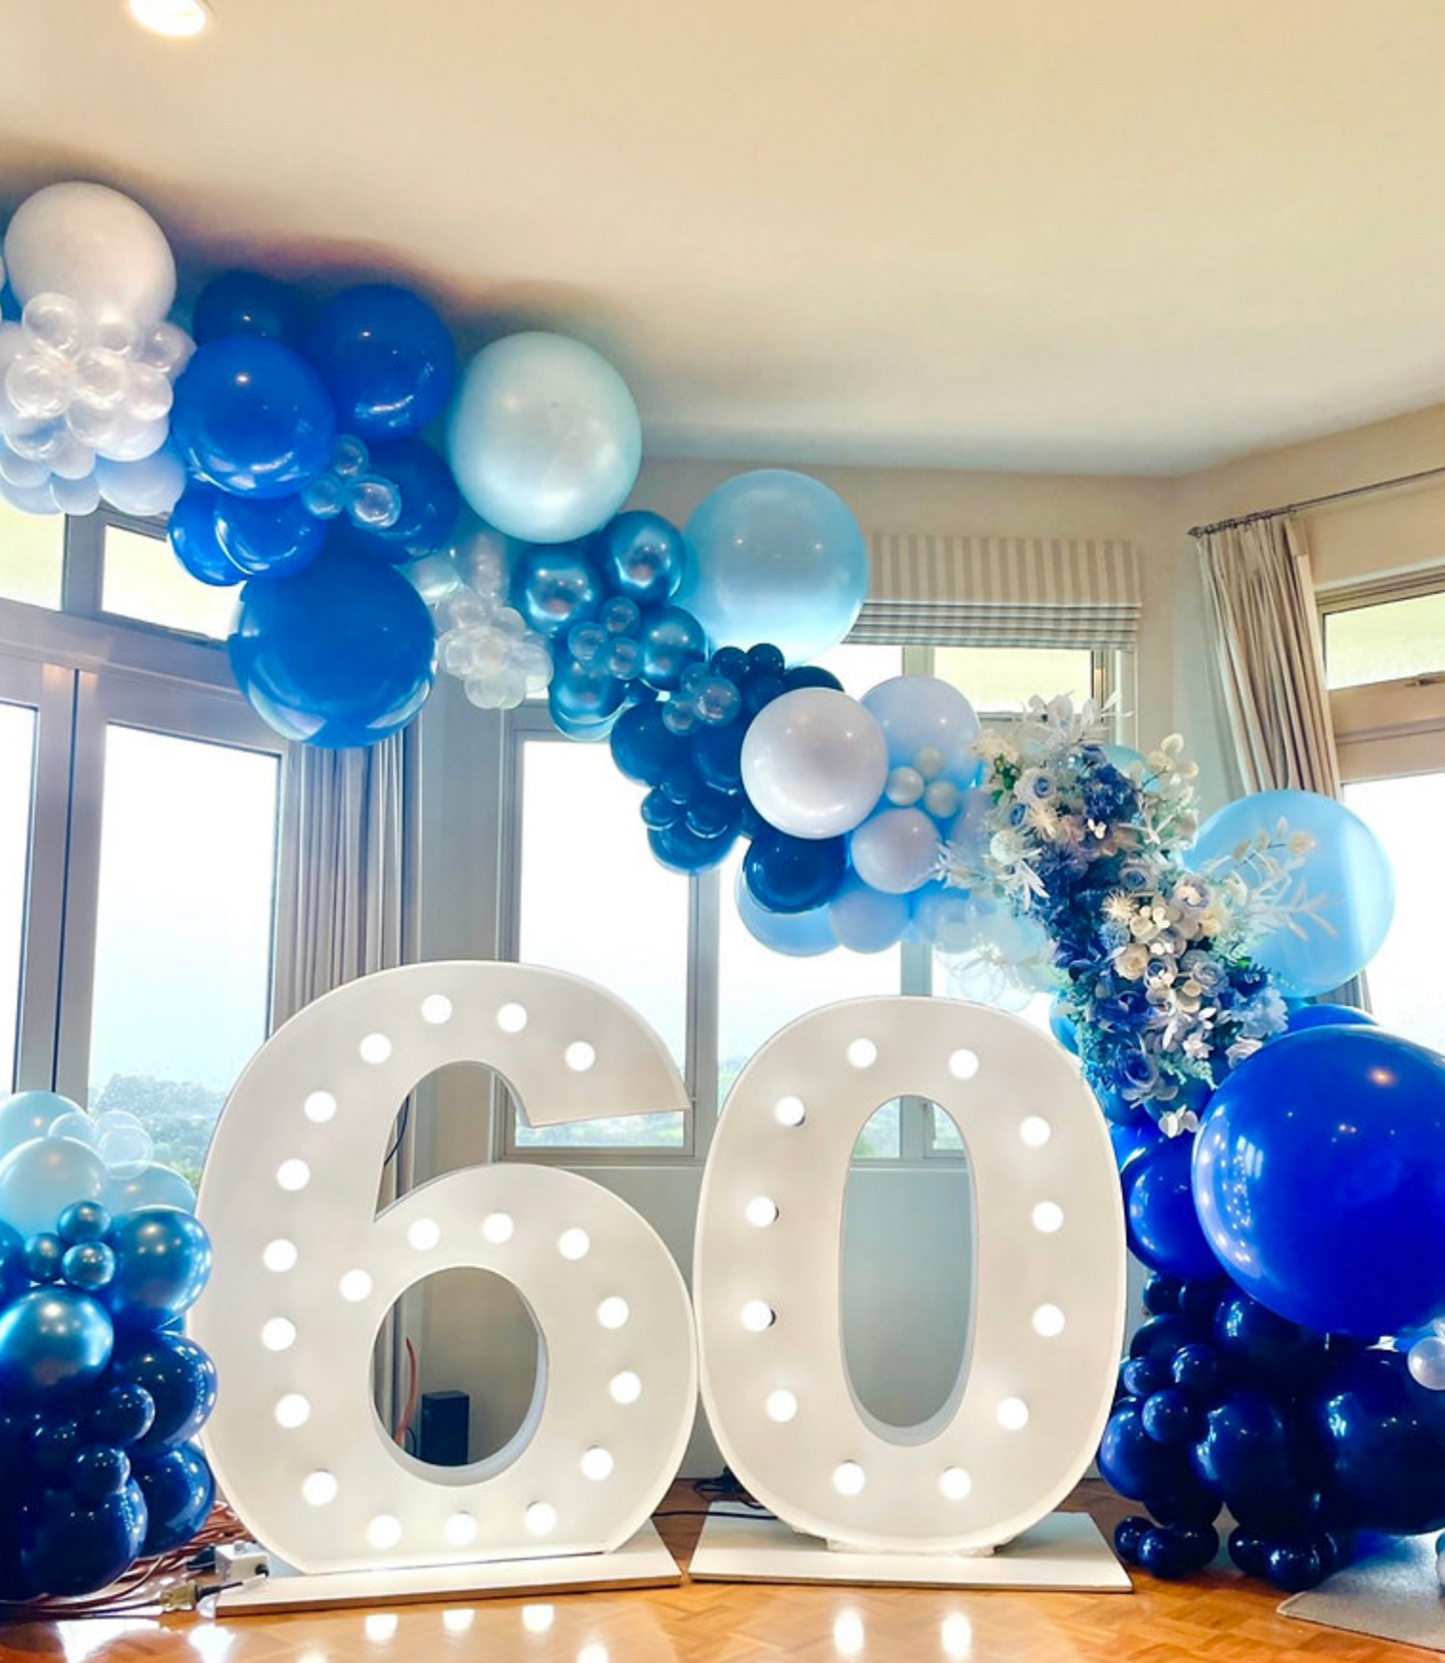 60th Light up number hire and balloons package  Balloonz   